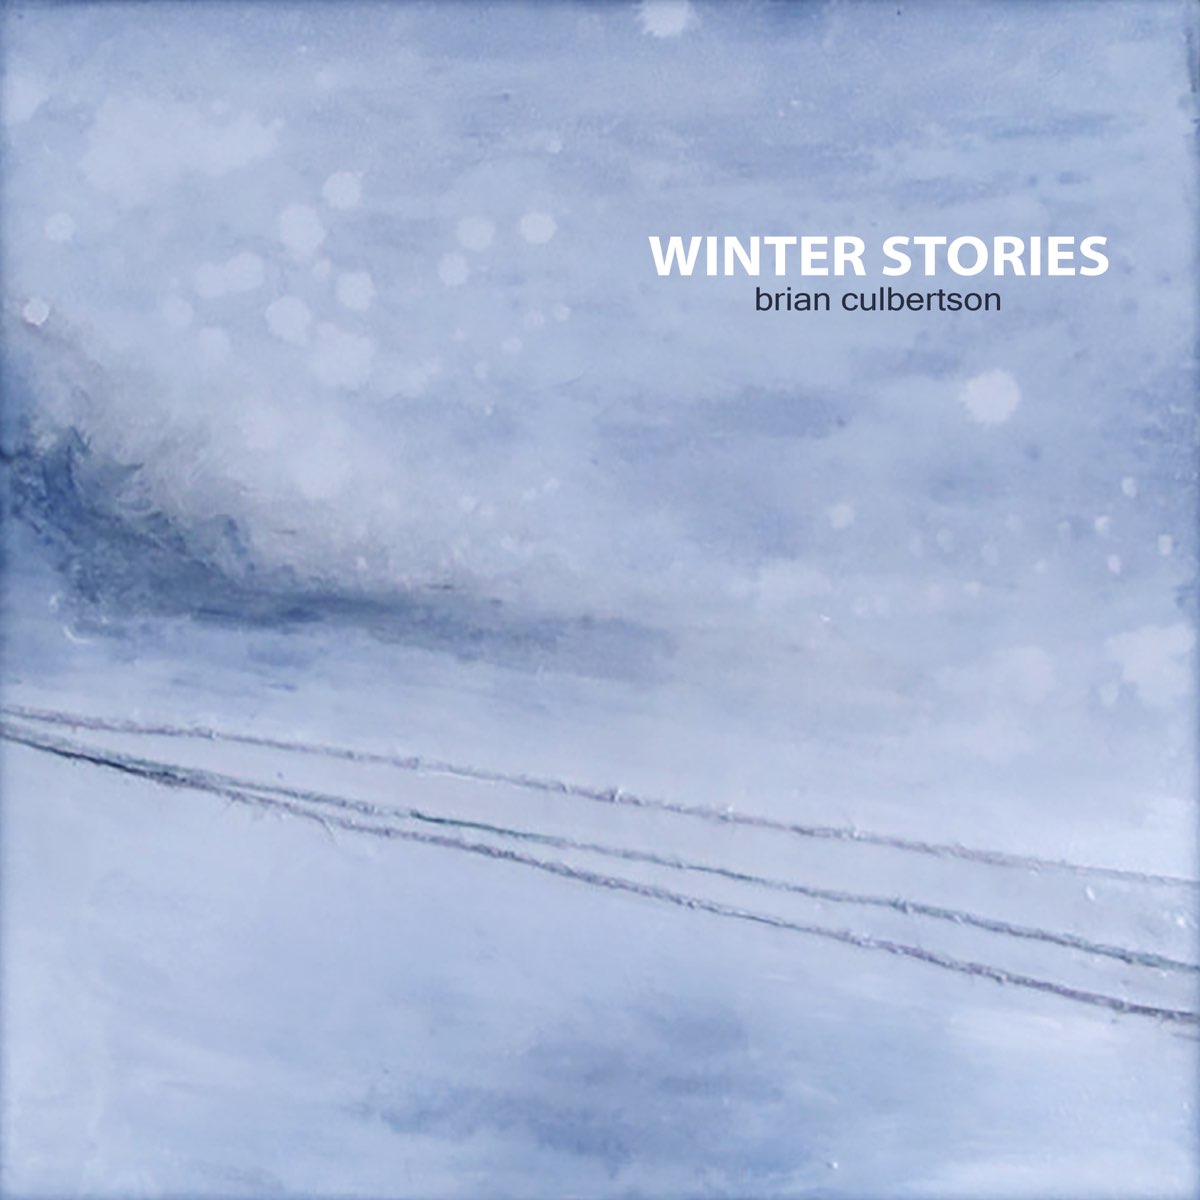 winter-stories-by-brian-culbertson-on-apple-music